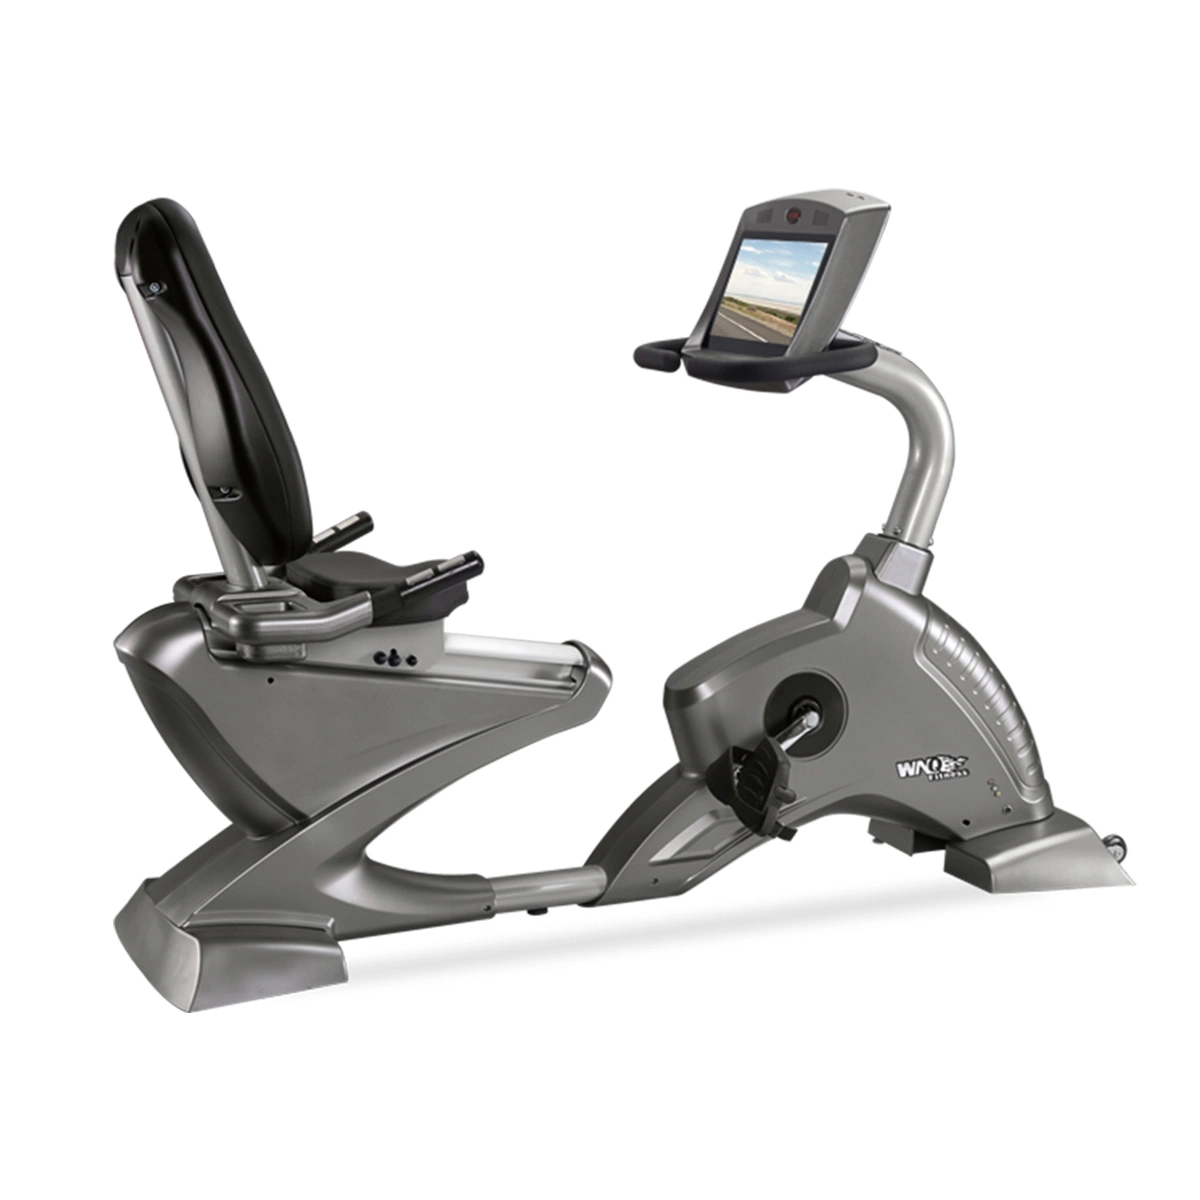 Recumnent Bike Gym Equipment with Power Supply Functions